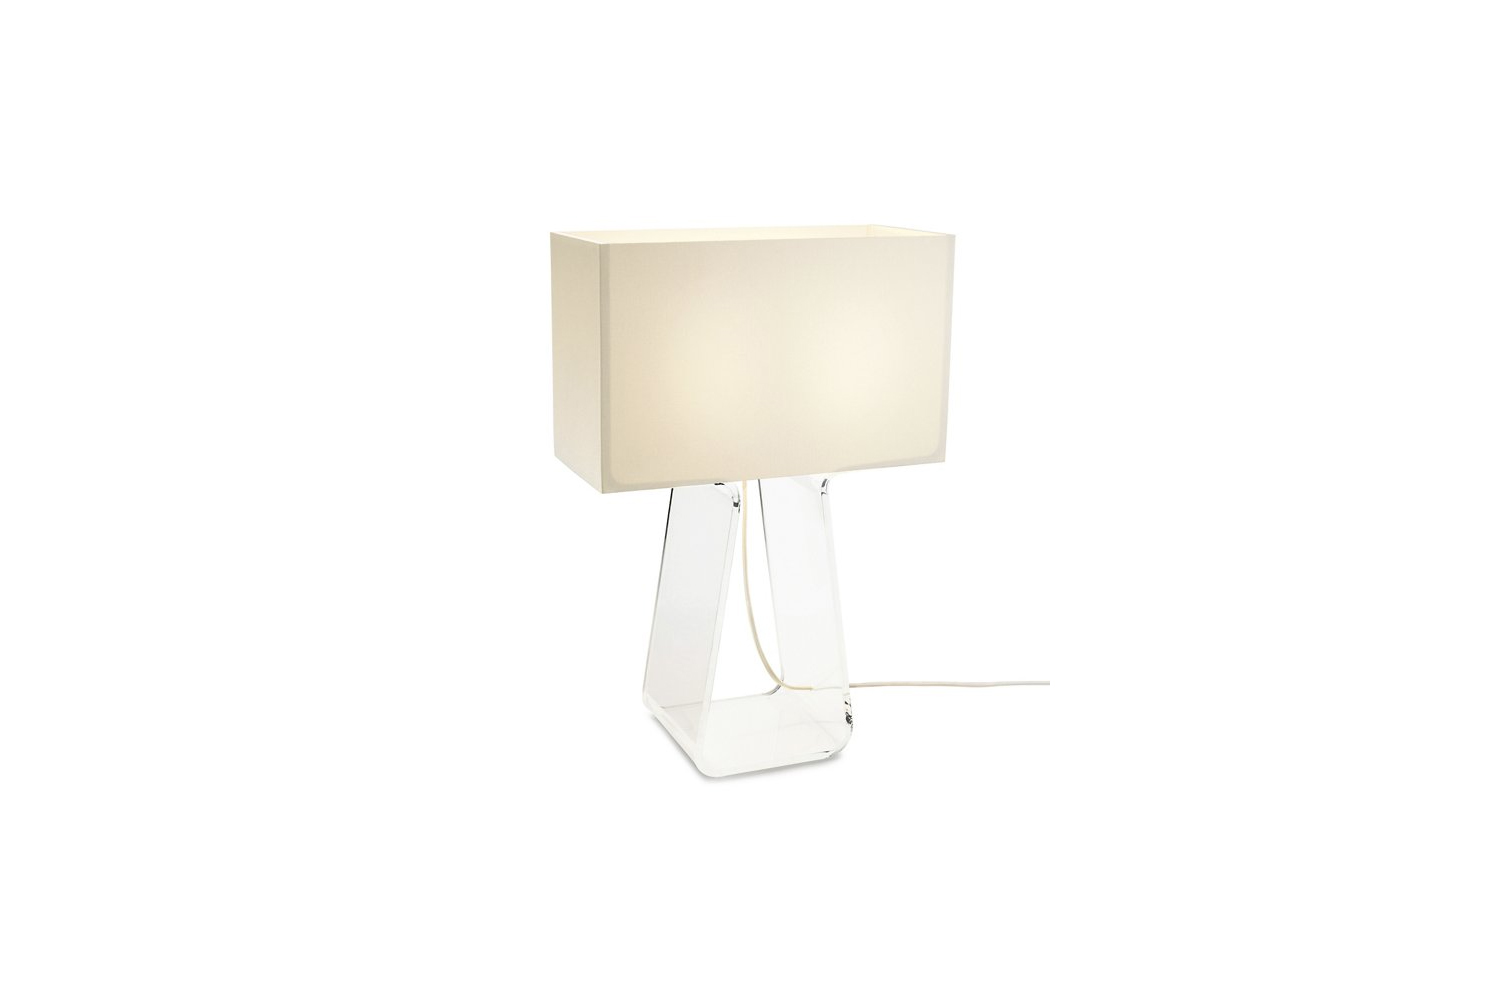 peter stathis pablo designs tube top table lamp 77